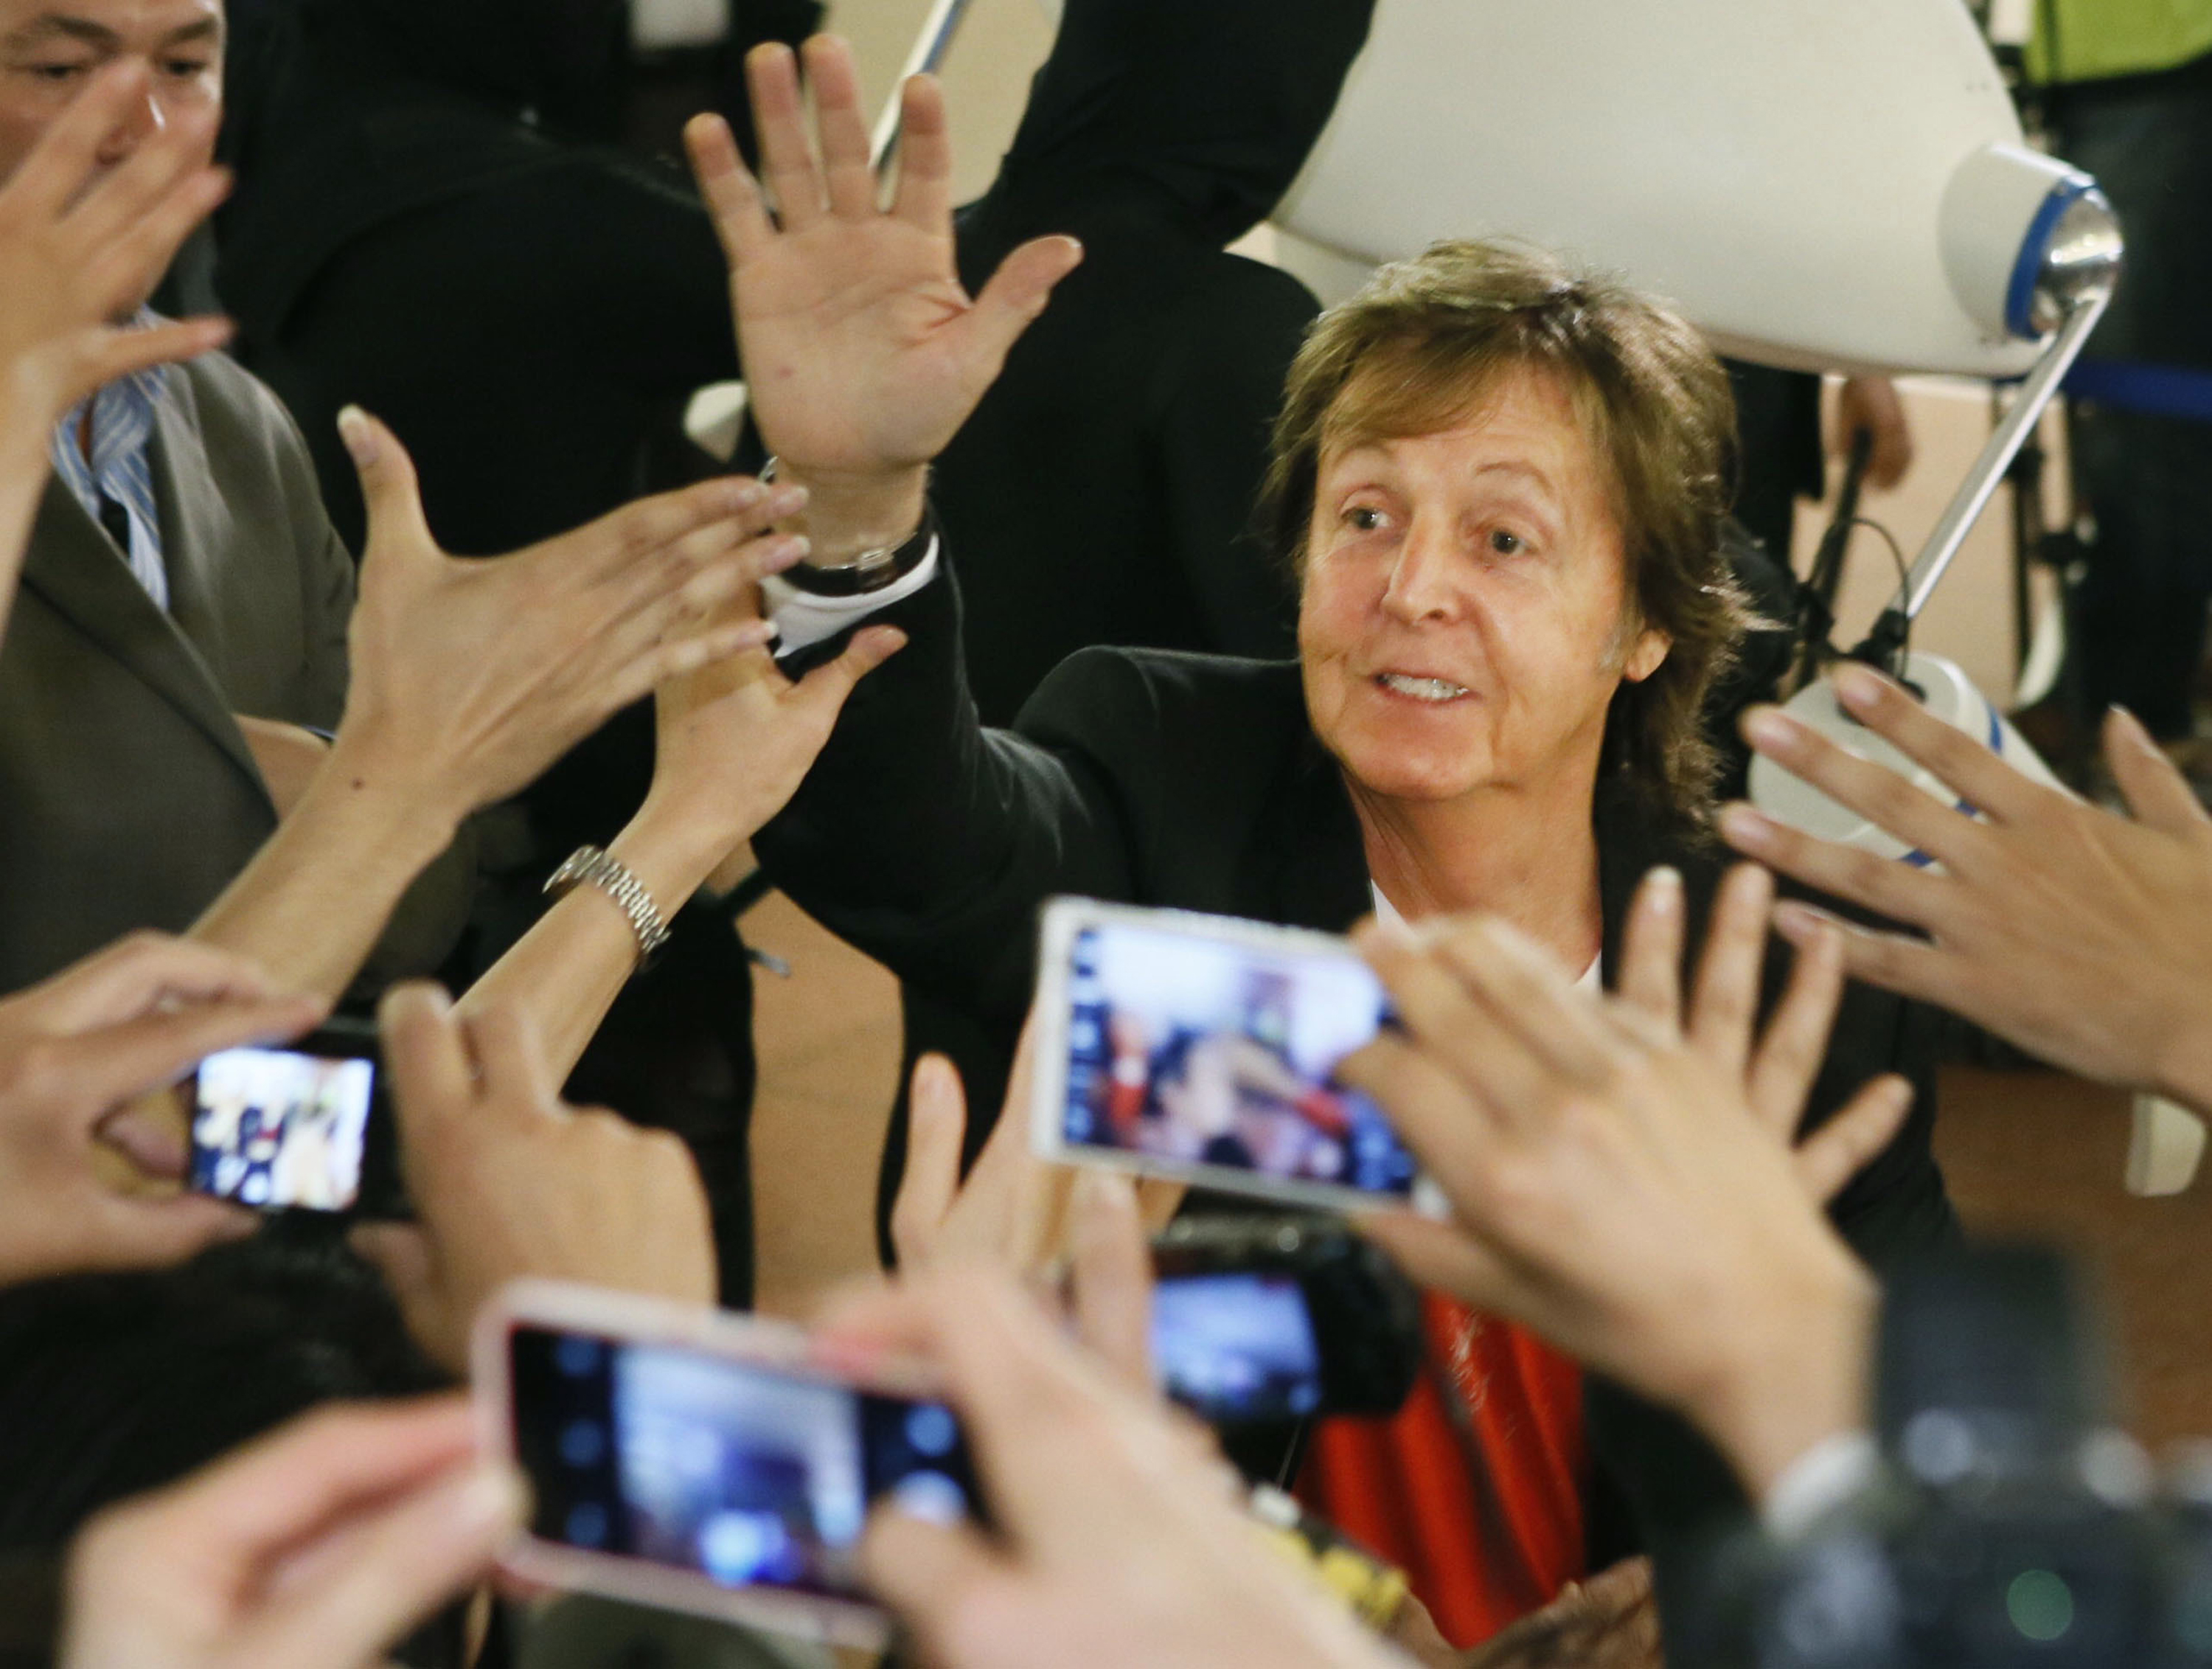 Paul McCartney exchanges high-fives with fans upon arriving at Tokyo's Haneda airport, for concerts in Japan, on May 15, 2014. | Source: Getty Images